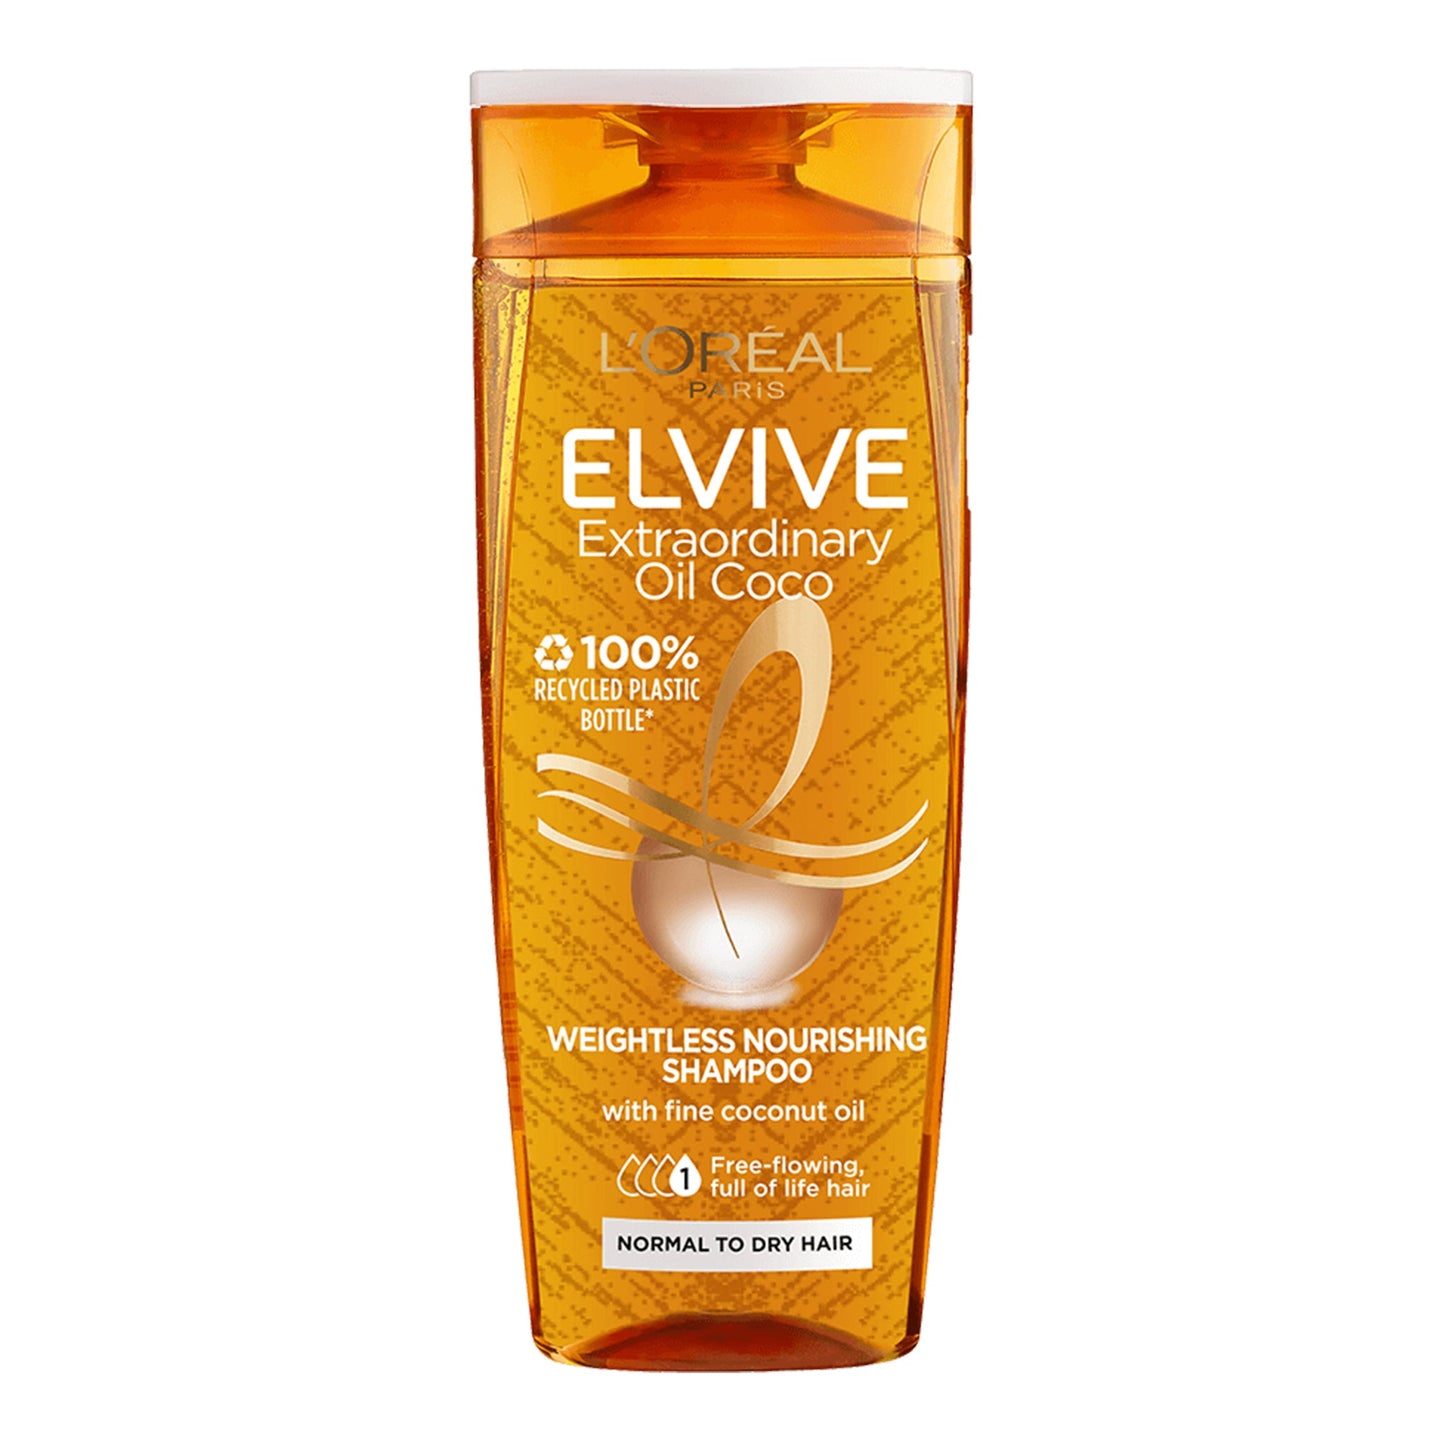 L'OREAL PARIS - ELVIVE EXTRAORDINARY OIL COCO WEIGHTLESS NOURISHING SHAMPOO WITH EXTRA-FINE COCONUT OIL - 400ML